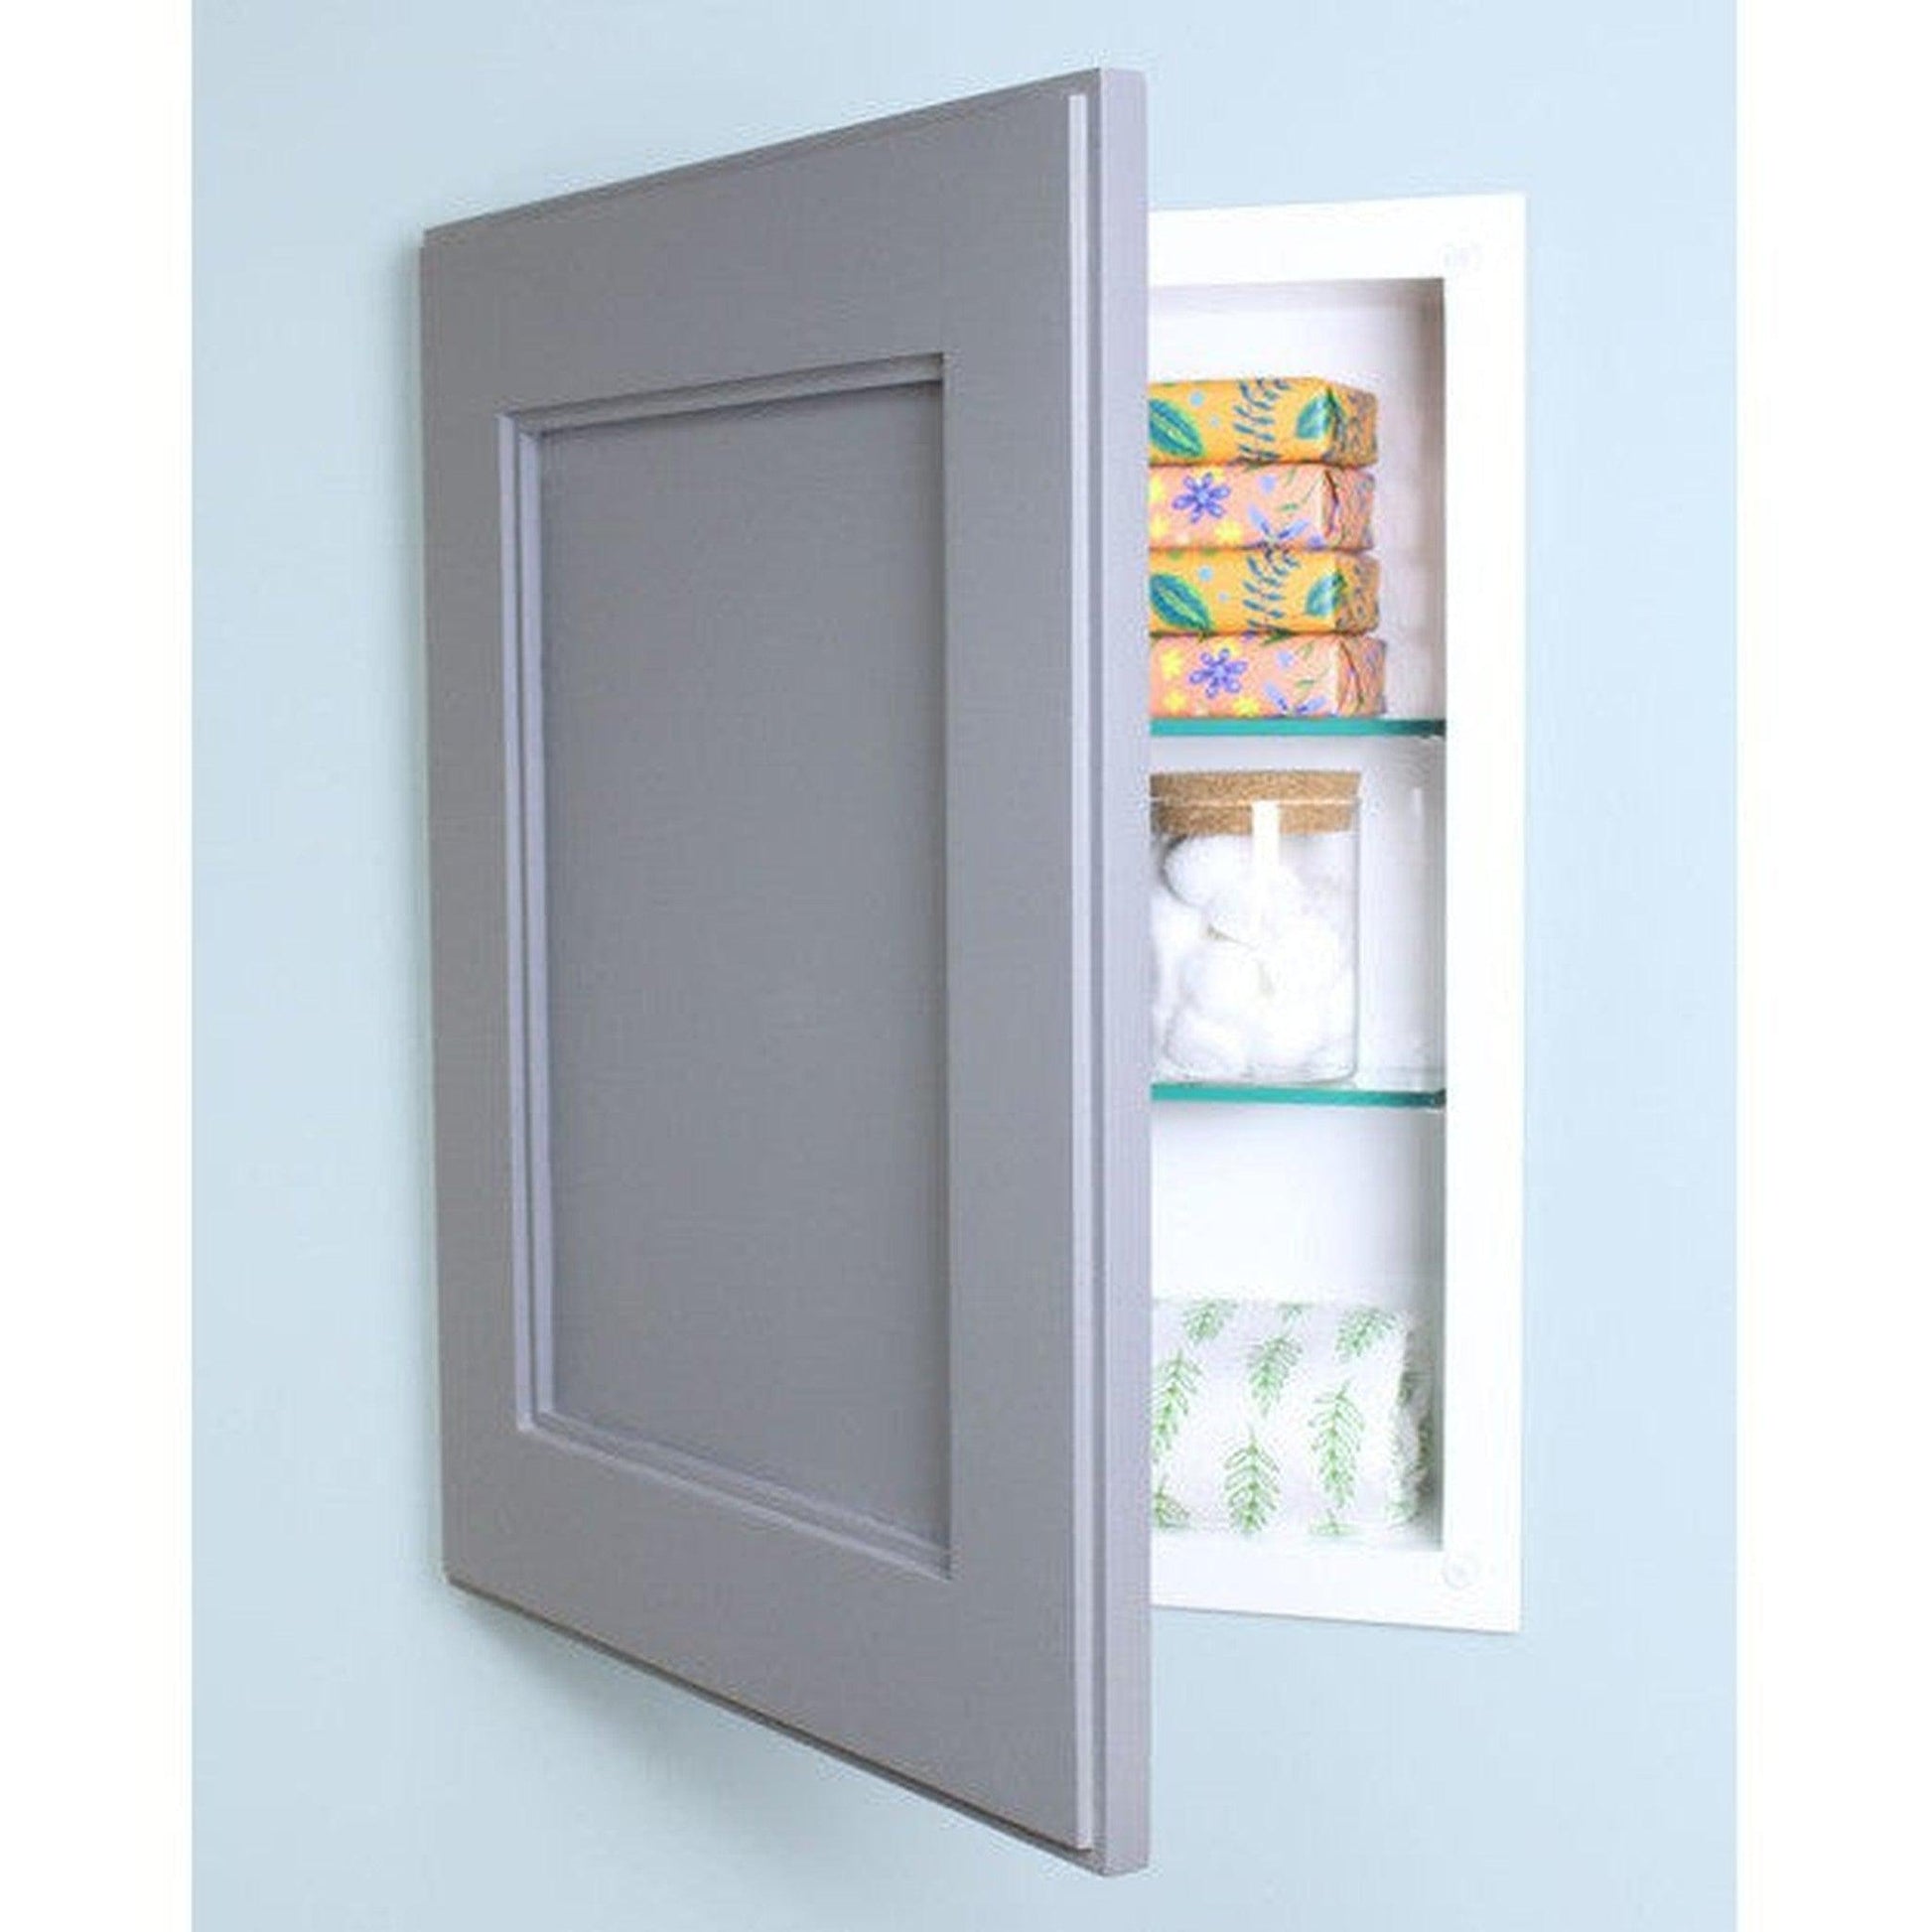 Fox Hollow Furnishings 14" x 18" Dark Gray Shaker Style Special 6" Depth White Interior Recessed Medicine Cabinet With Mirror